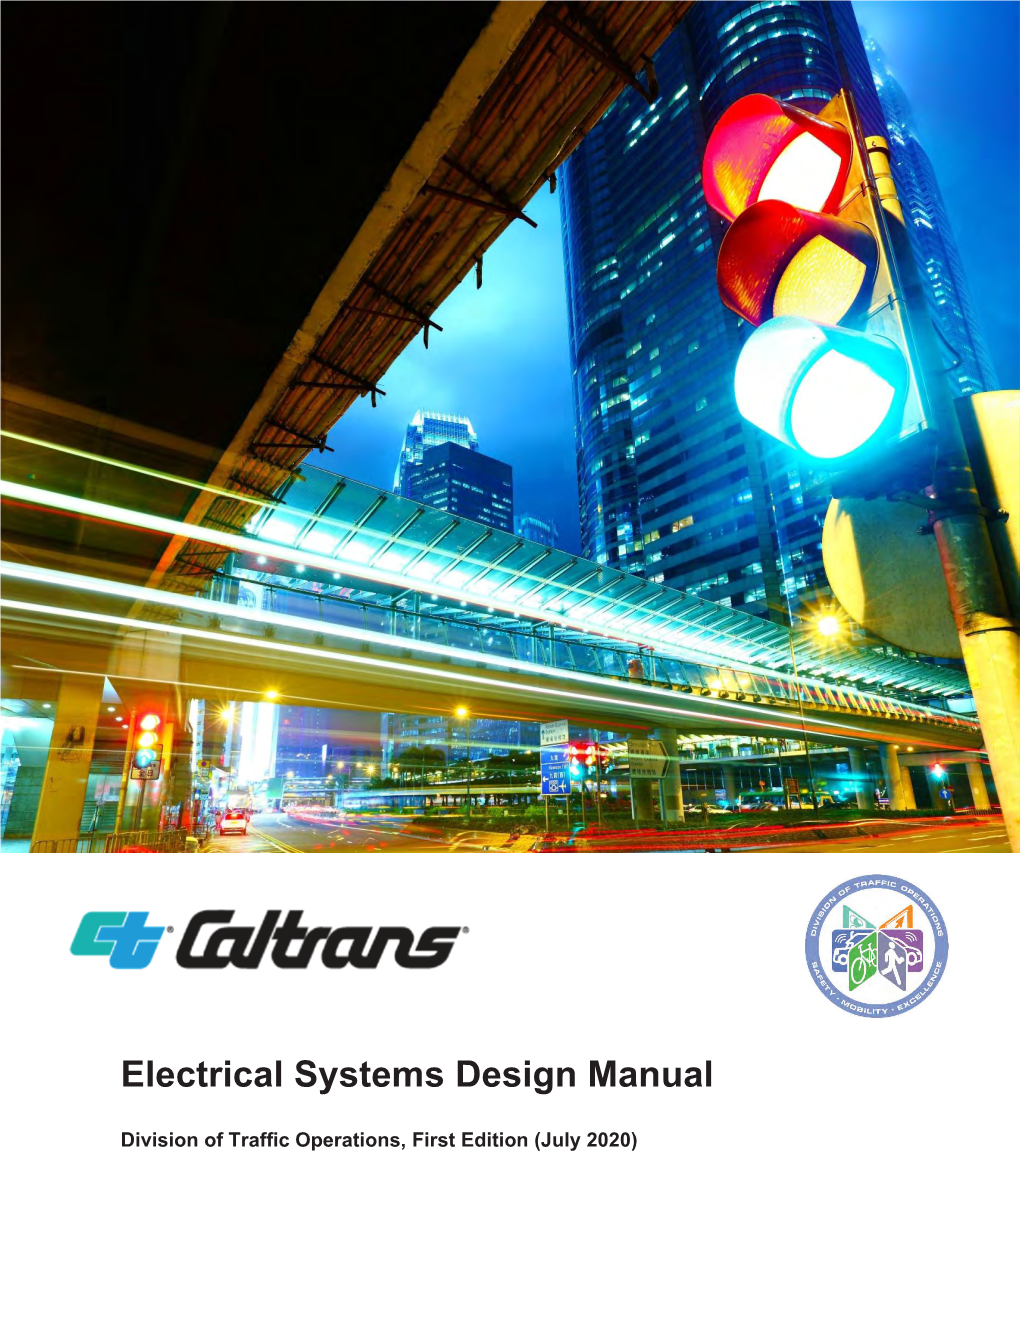 Electrical Systems Design Manual